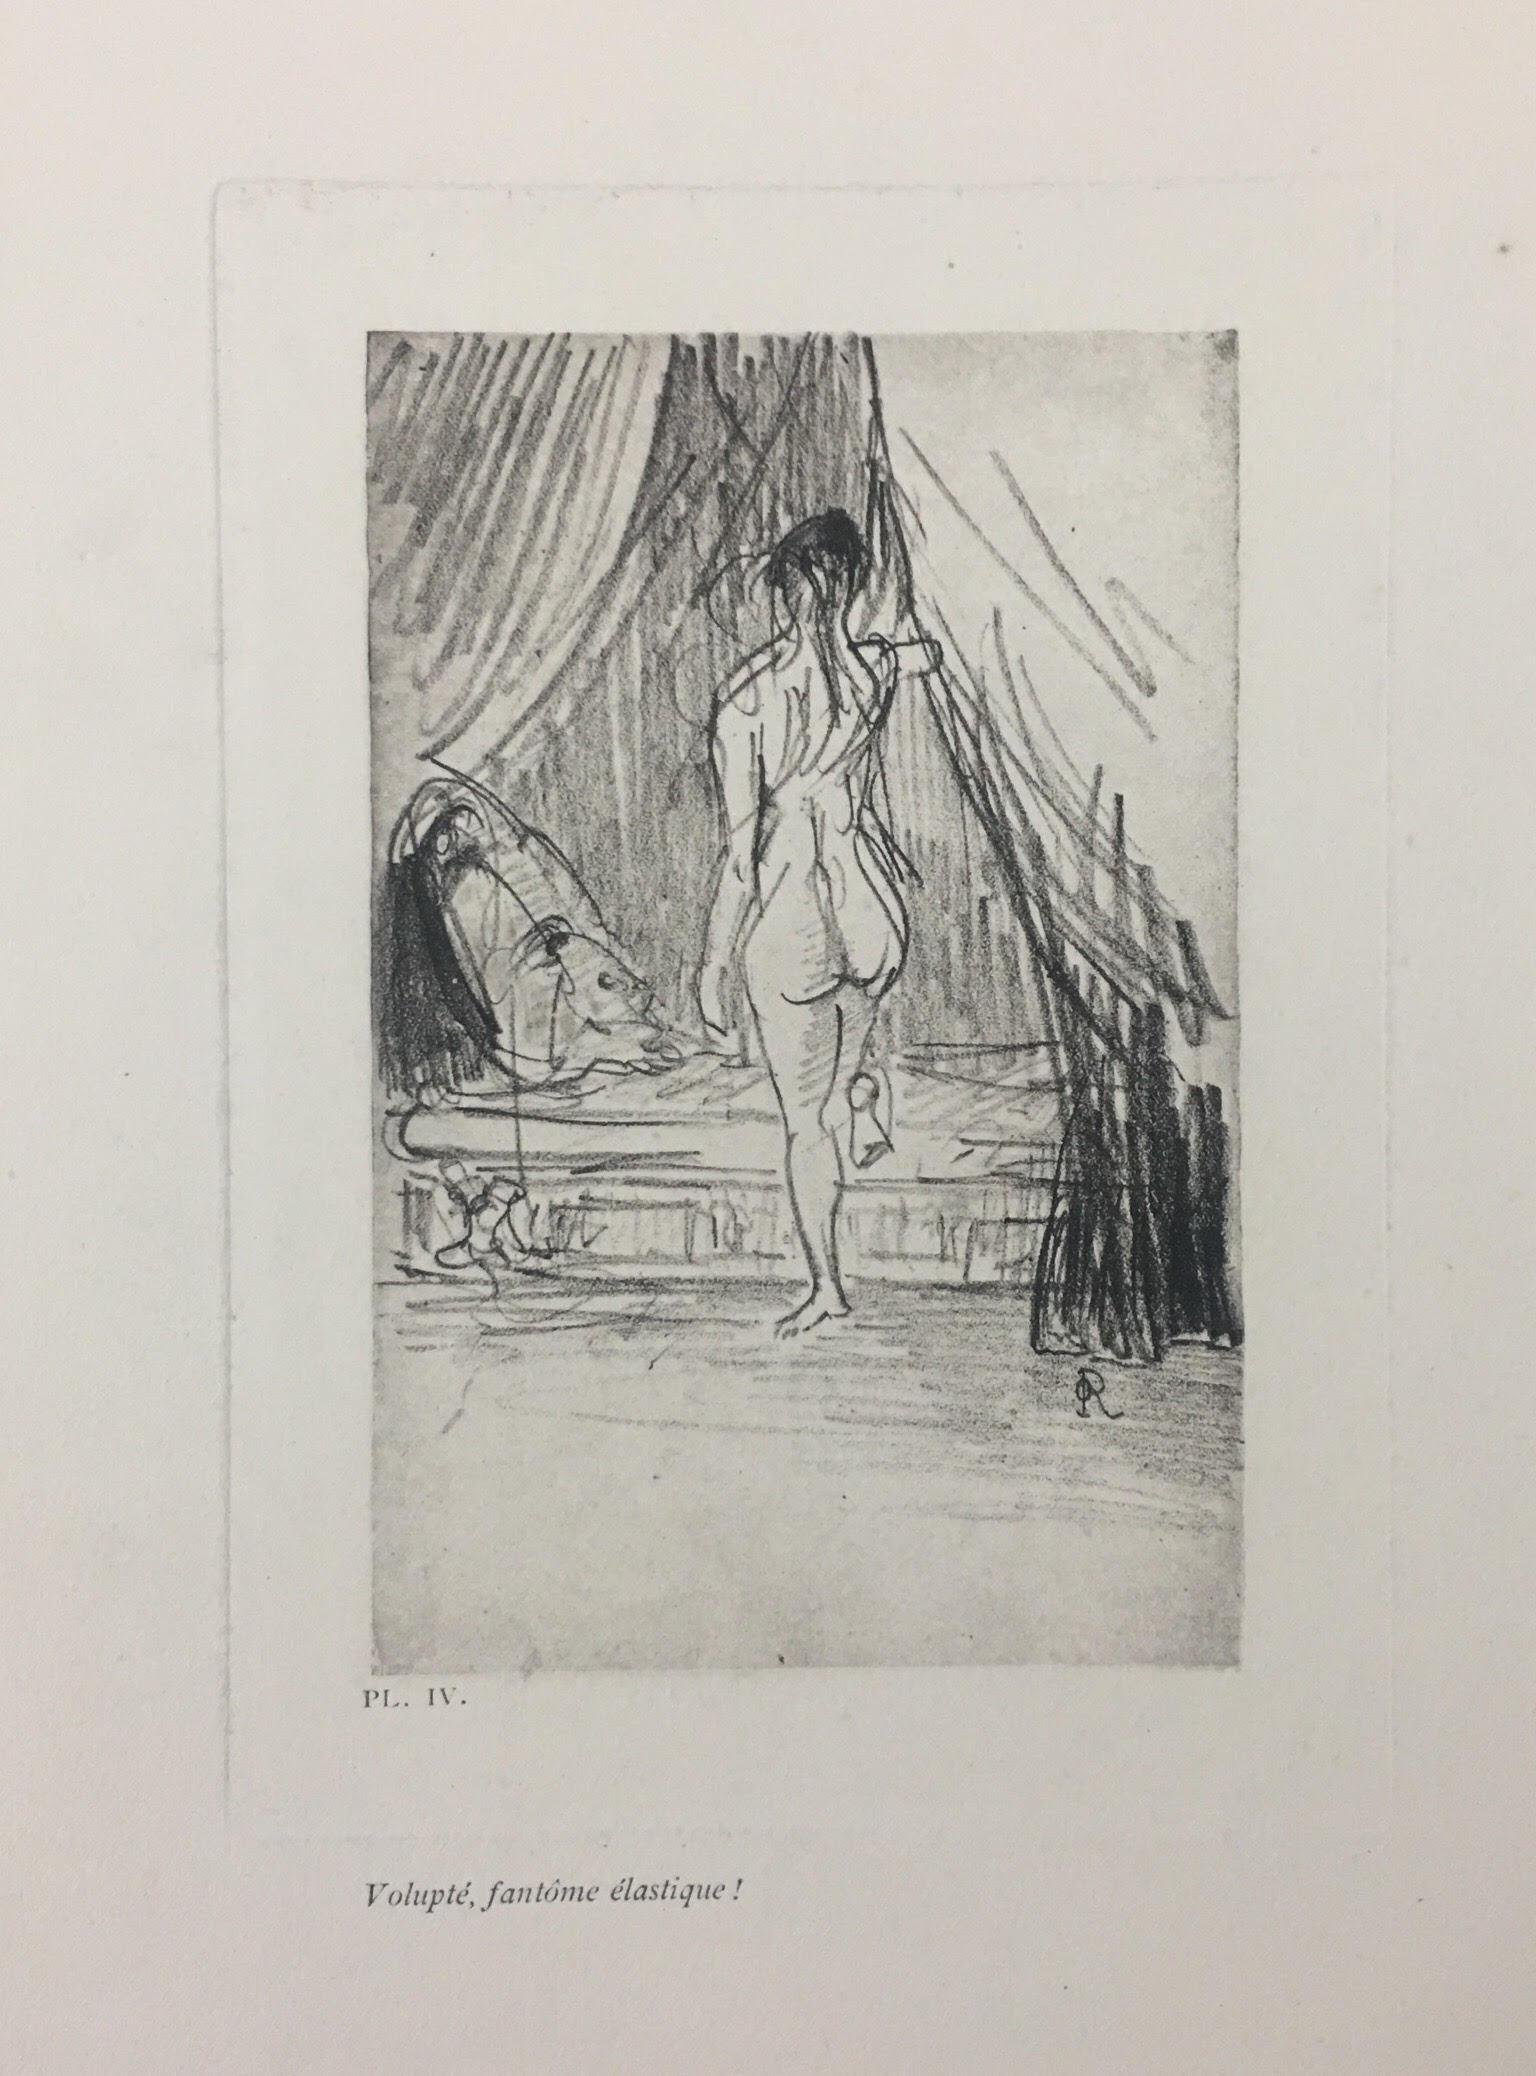 This rare 1890 edition of Les Fleurs du mal is a suite of original engravings by Odilon Redon.
Complete and homogeneous series of 8 héliogravures (Evely process) within the editorial portfolio in-folio (mm 454x322).
Rare first edition, printed by